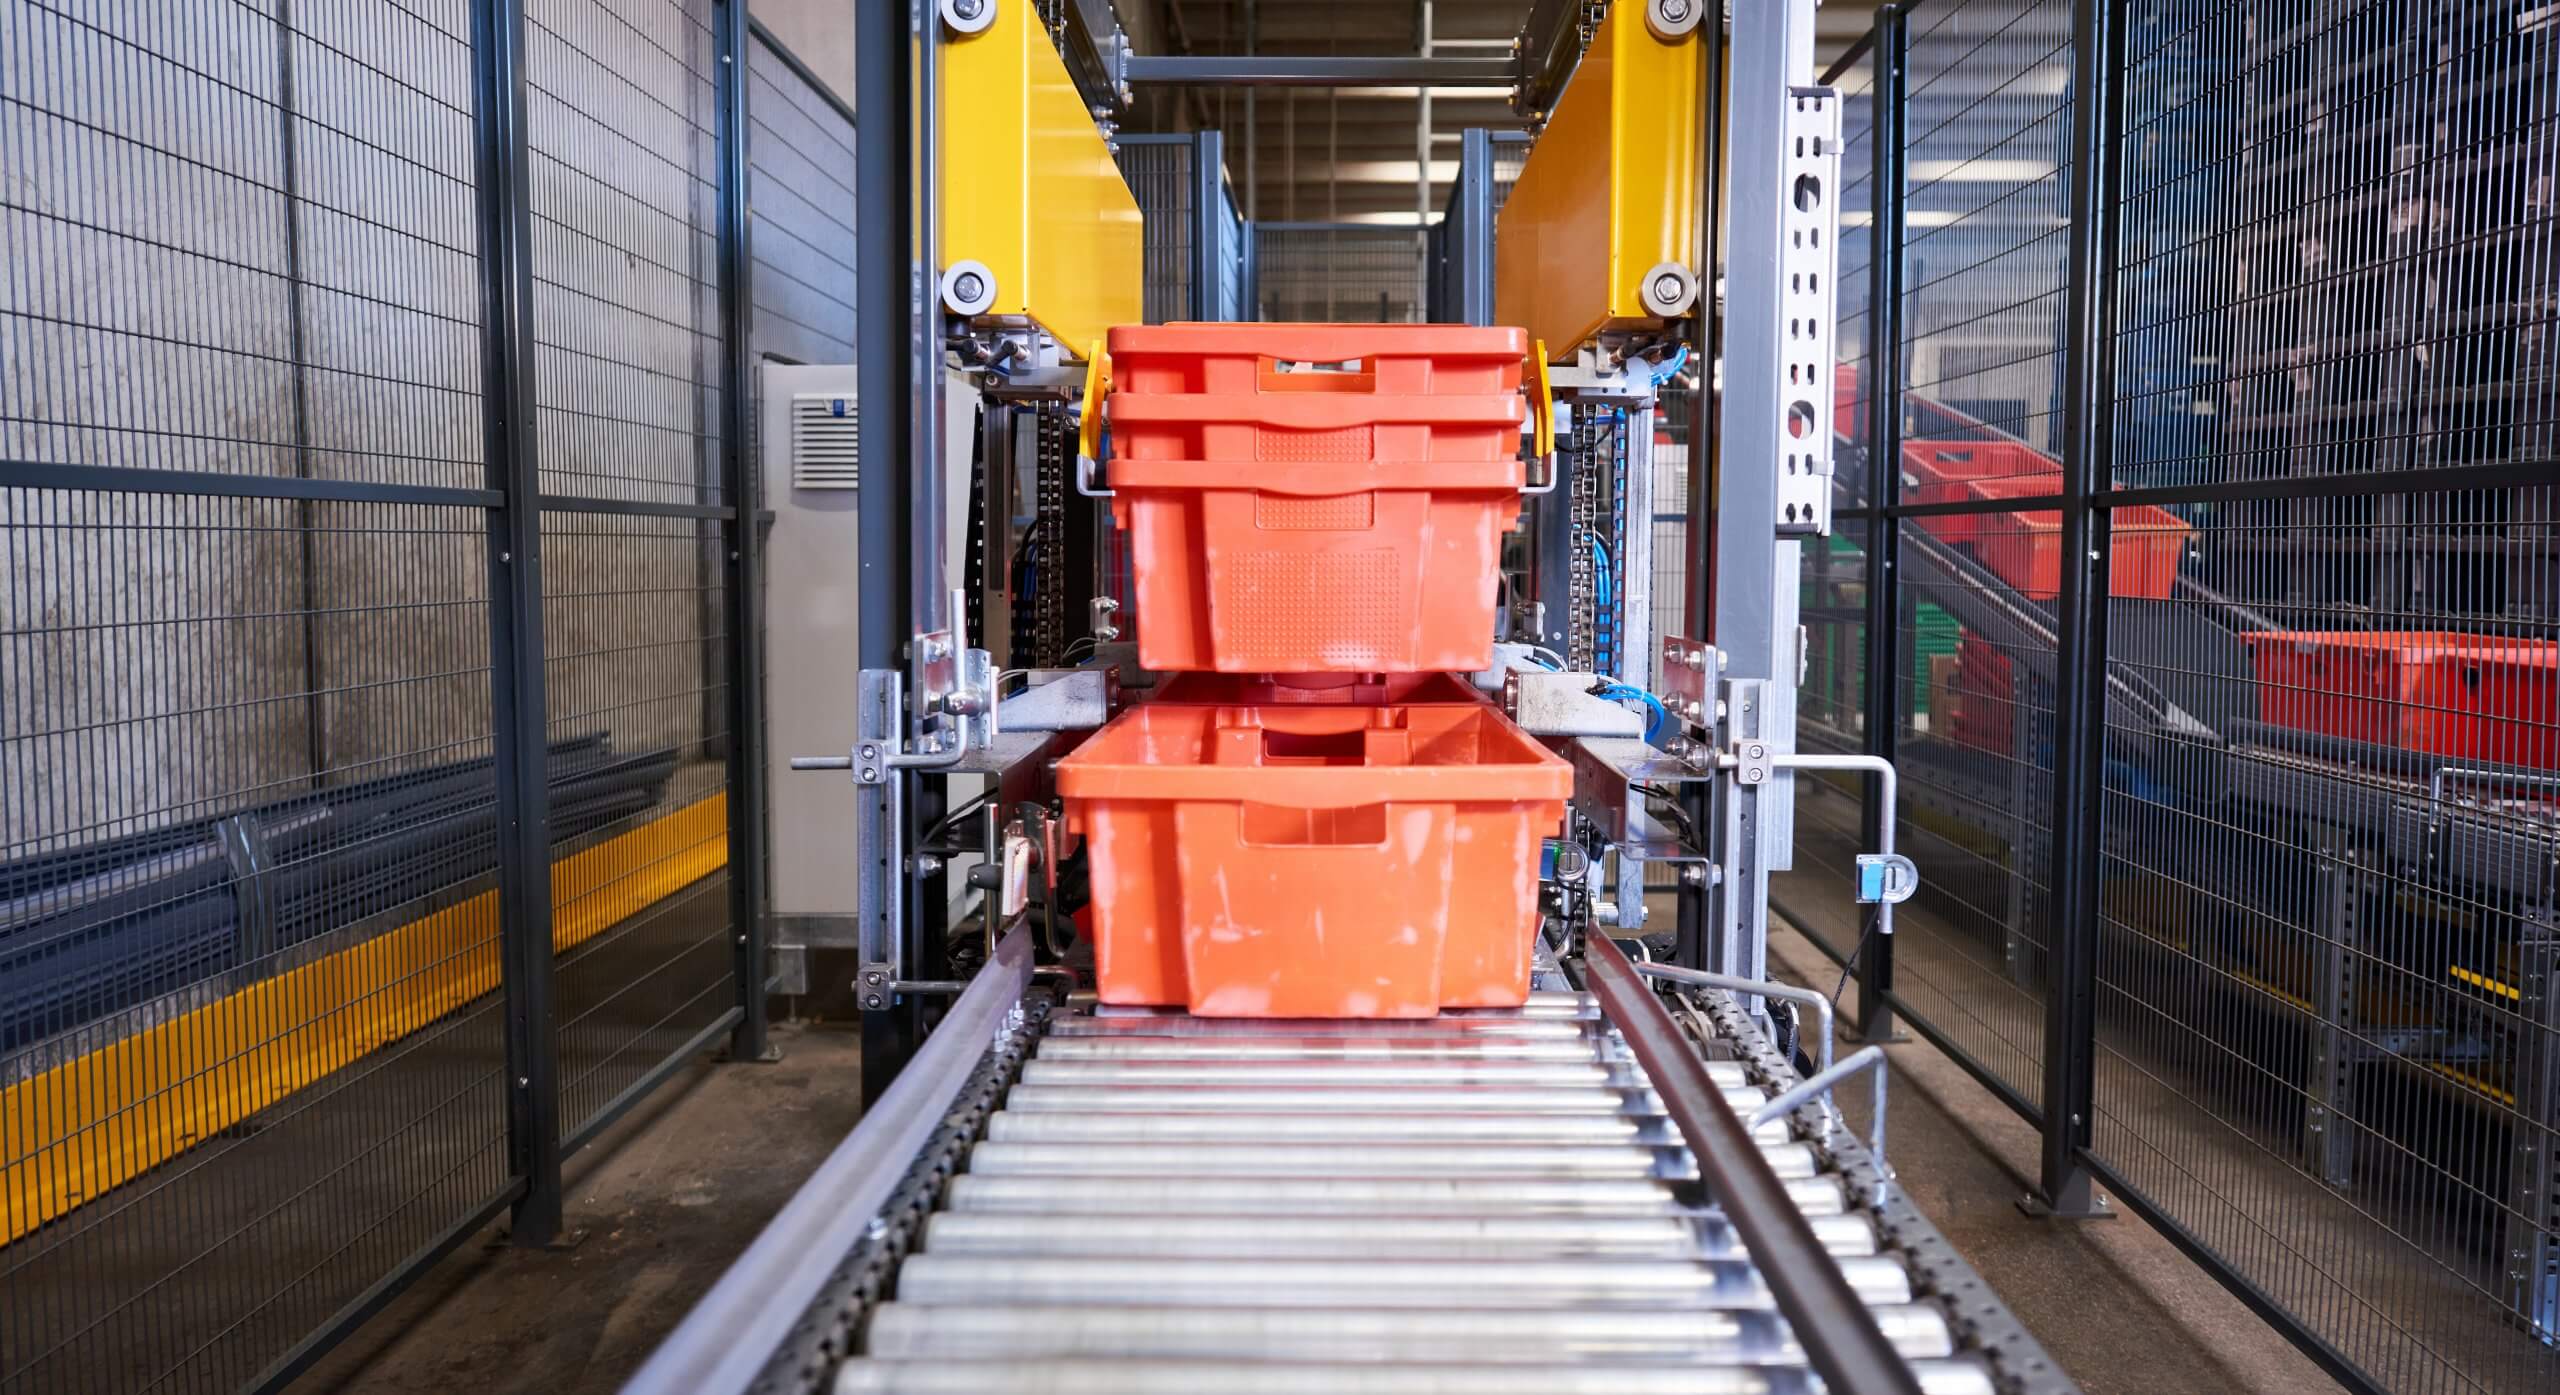 Front view of a fully automatic destacking machine that separates totes for meat and meat products. The tote stacks are transported to the machine on the conveyor system. Clamps grip the totes and separate them. The totes are placed on the conveyor system one by one and move on for further processing.